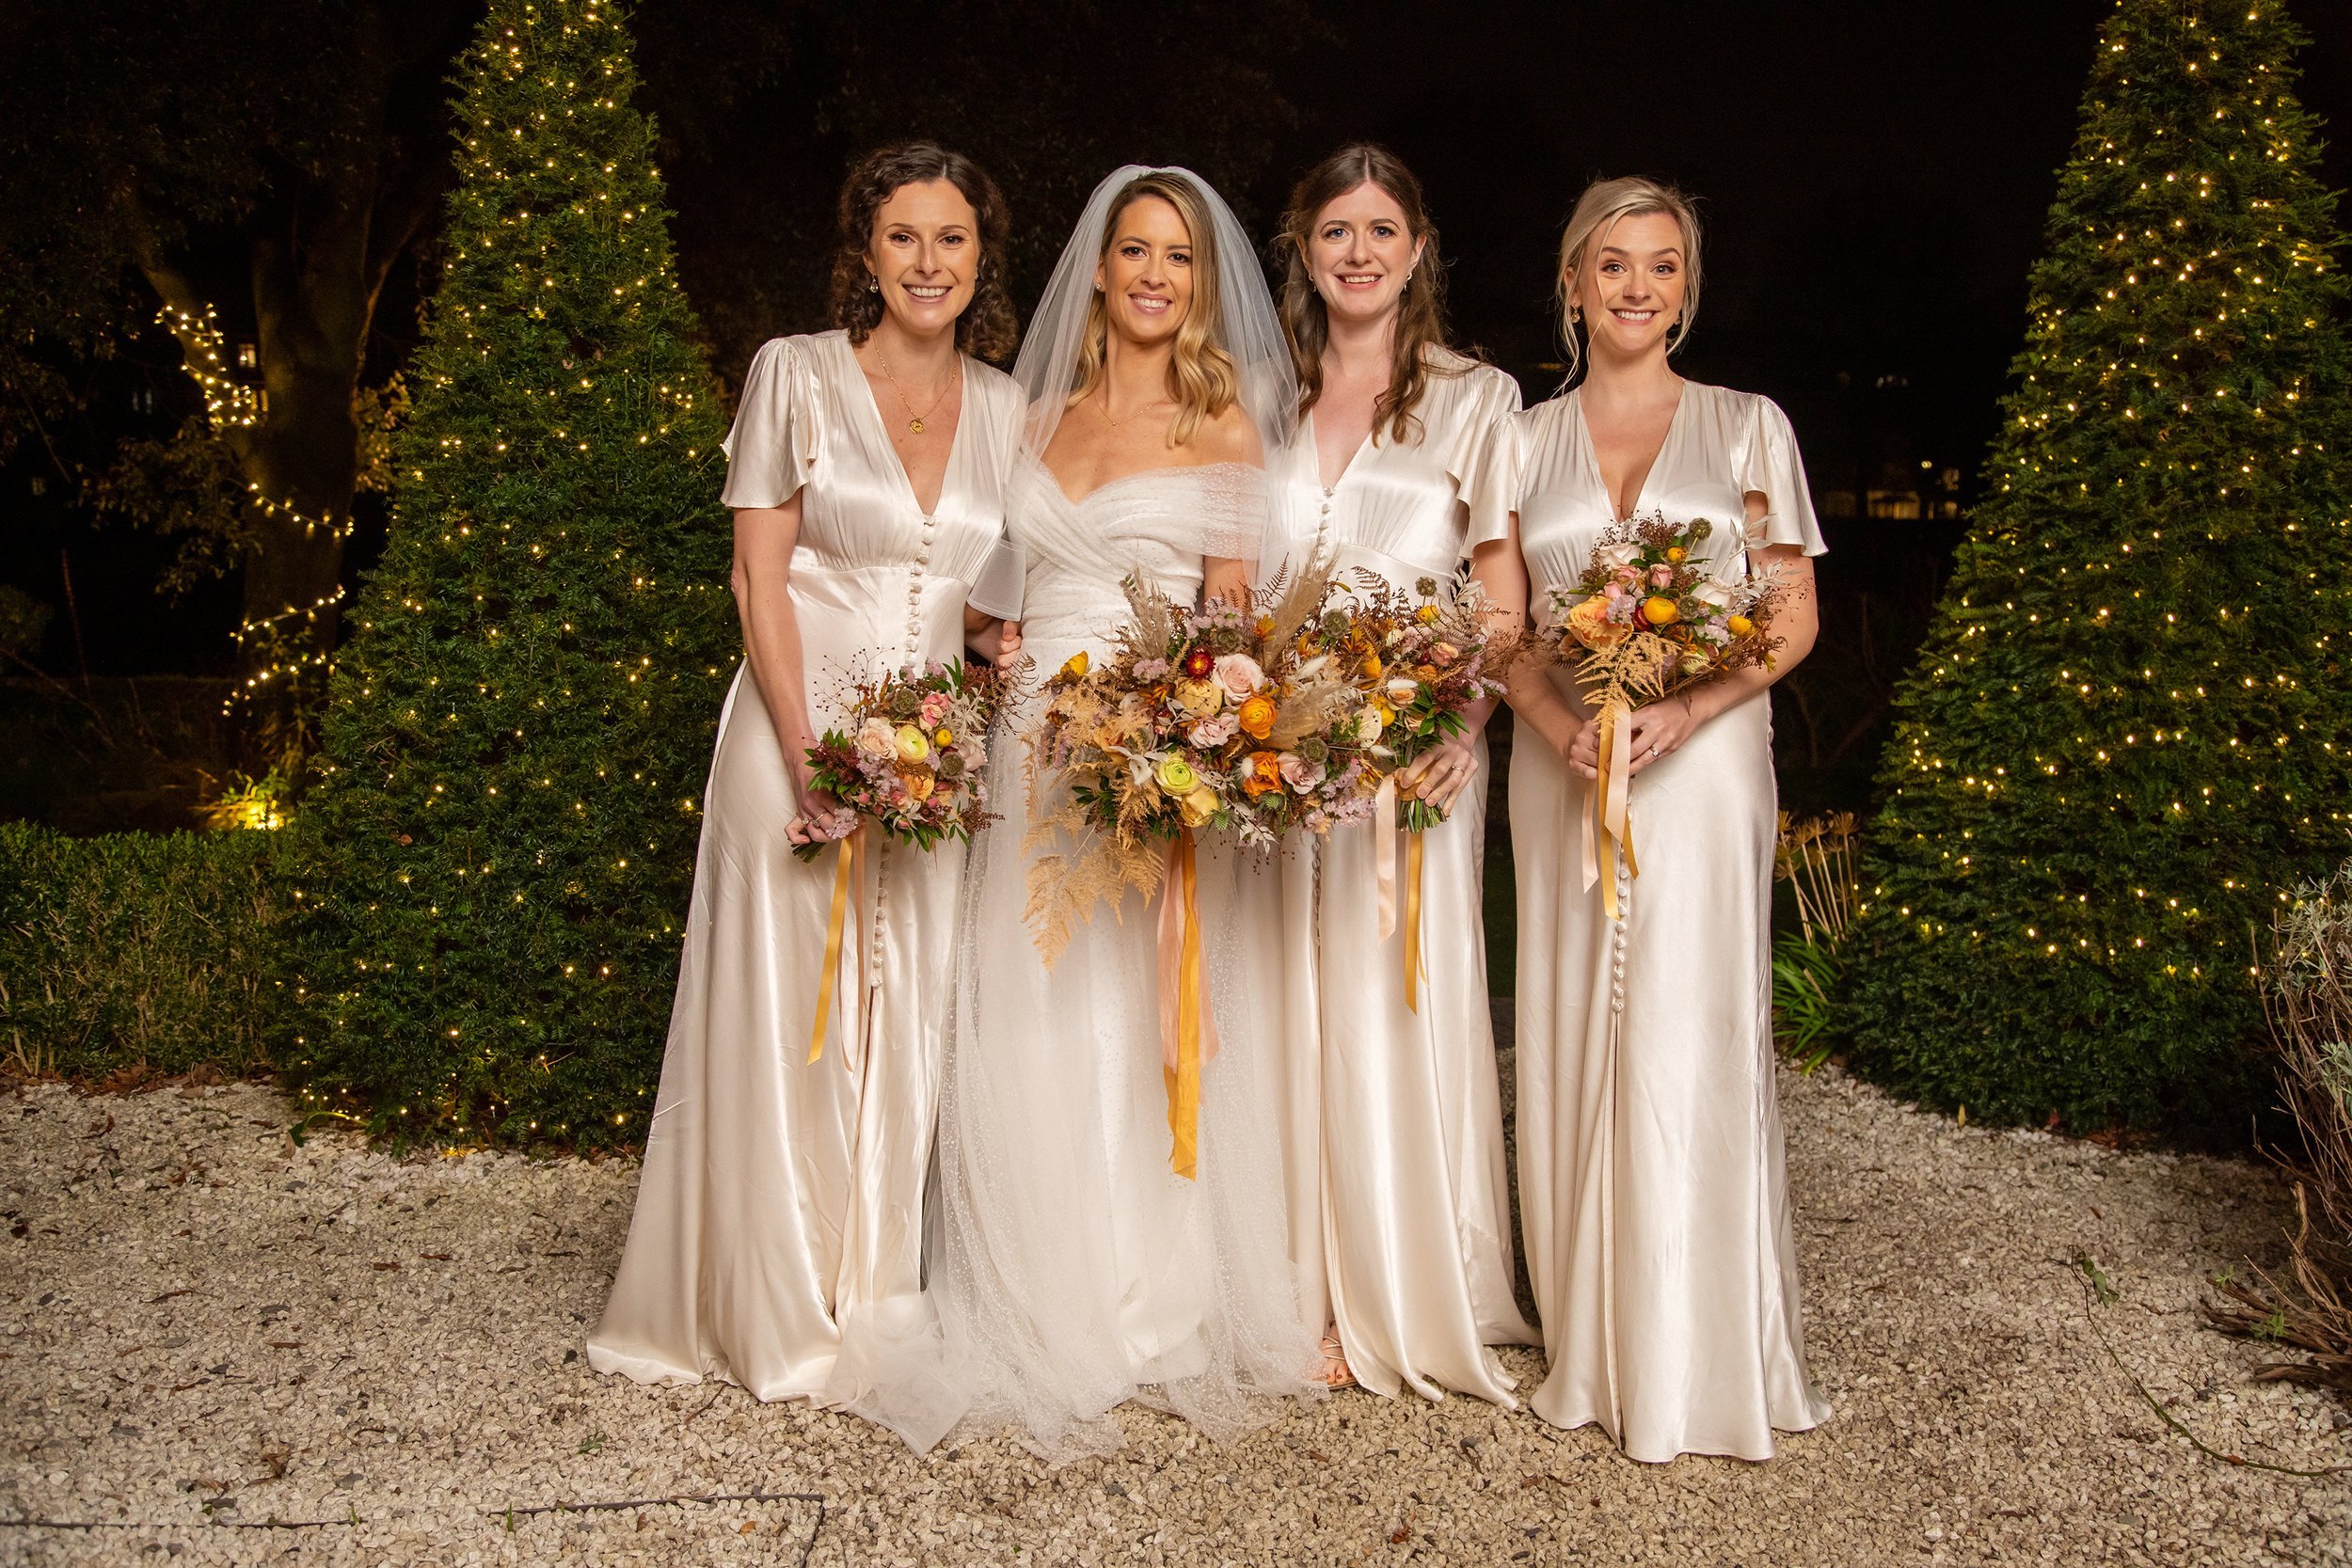 Beautiful bride Kate wore a wedding dress by Halfpenny London